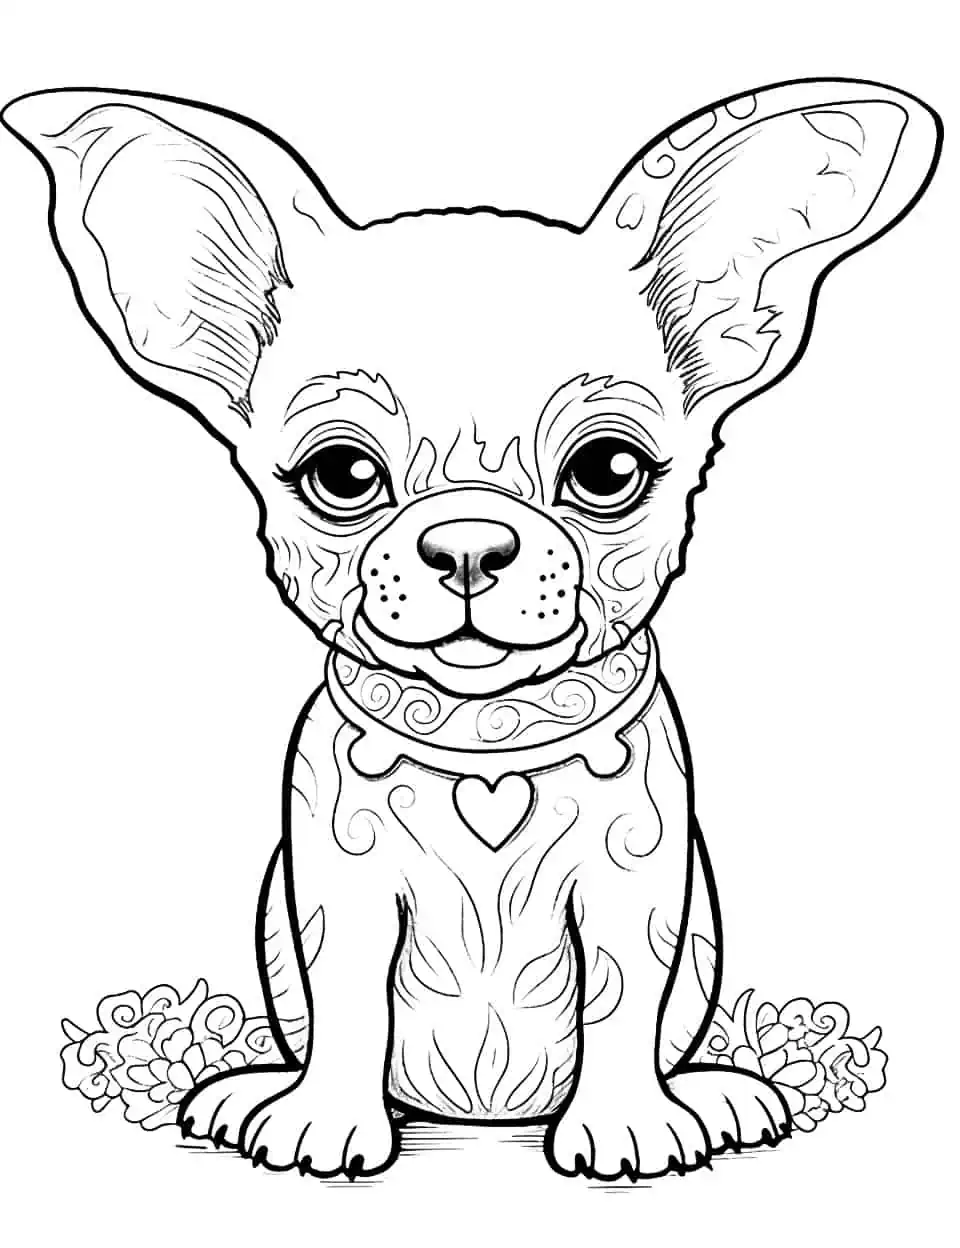 Mandala and Chihuahua Mix Coloring Page - A cute Chihuahua in the center of a detailed, intricate mandala pattern.